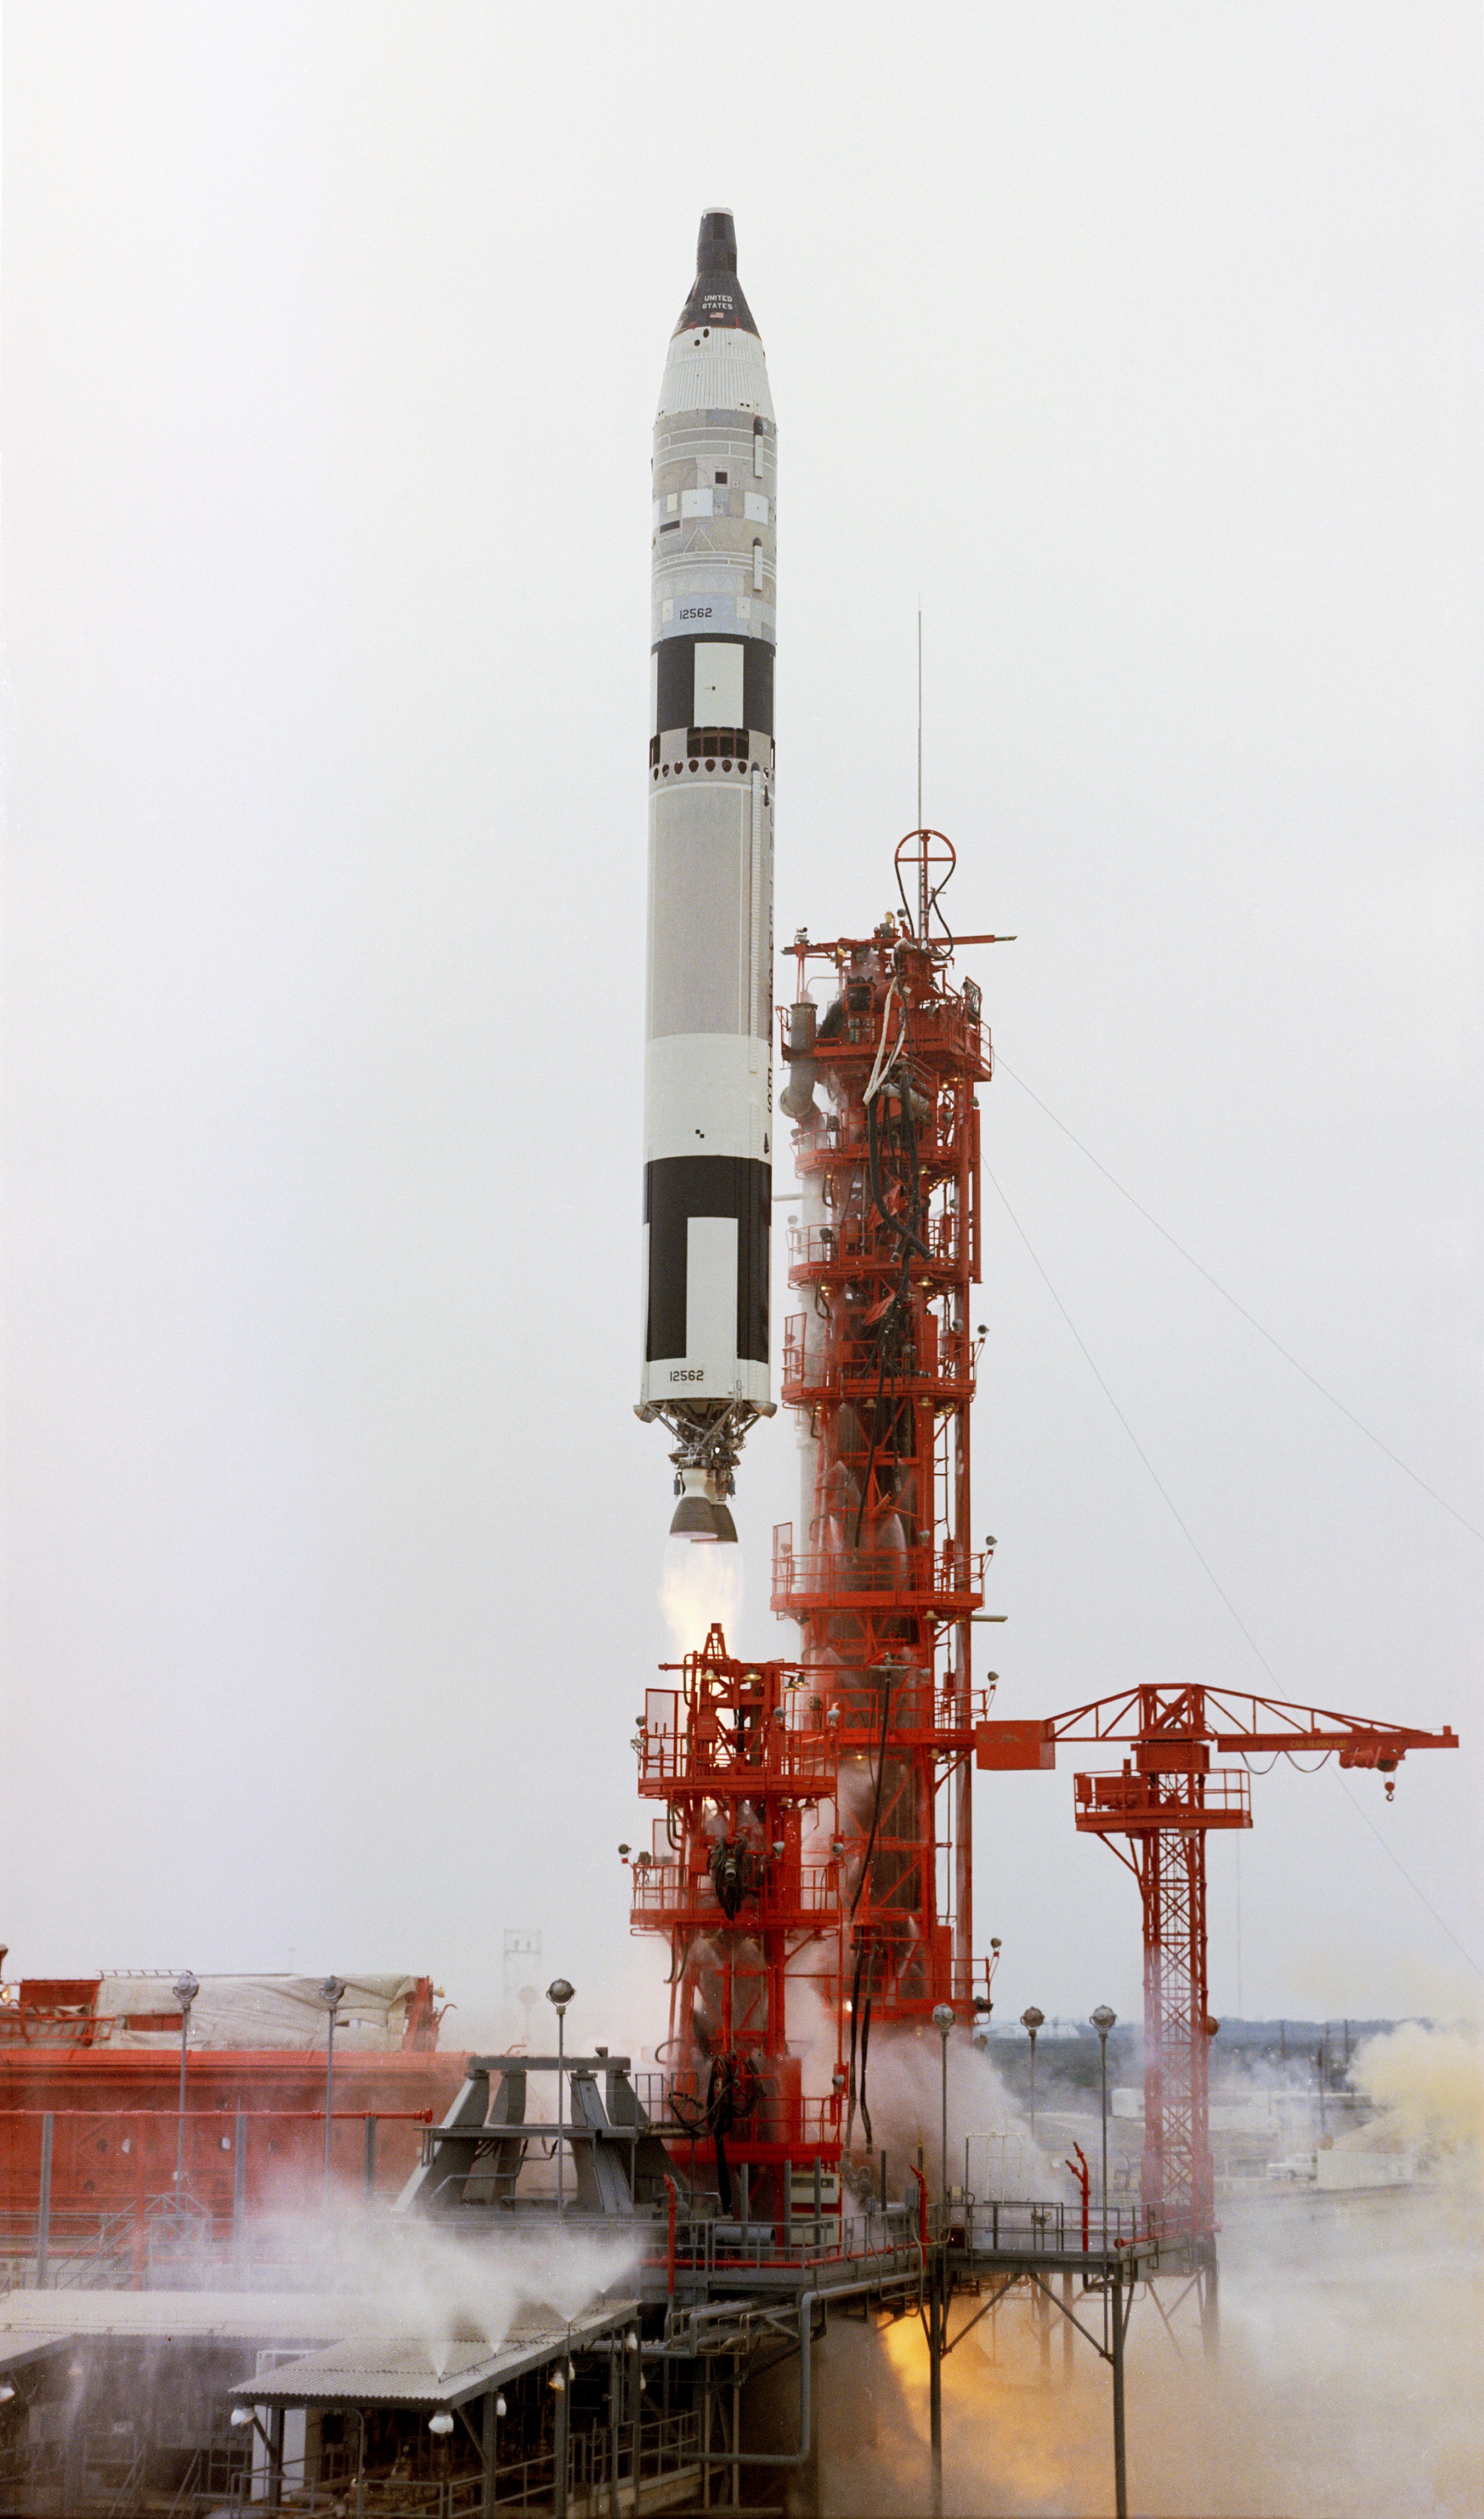 Gemini 7 lifts off from Launch Complex 19, 1430 EST, 4 December 1965. (NASA)